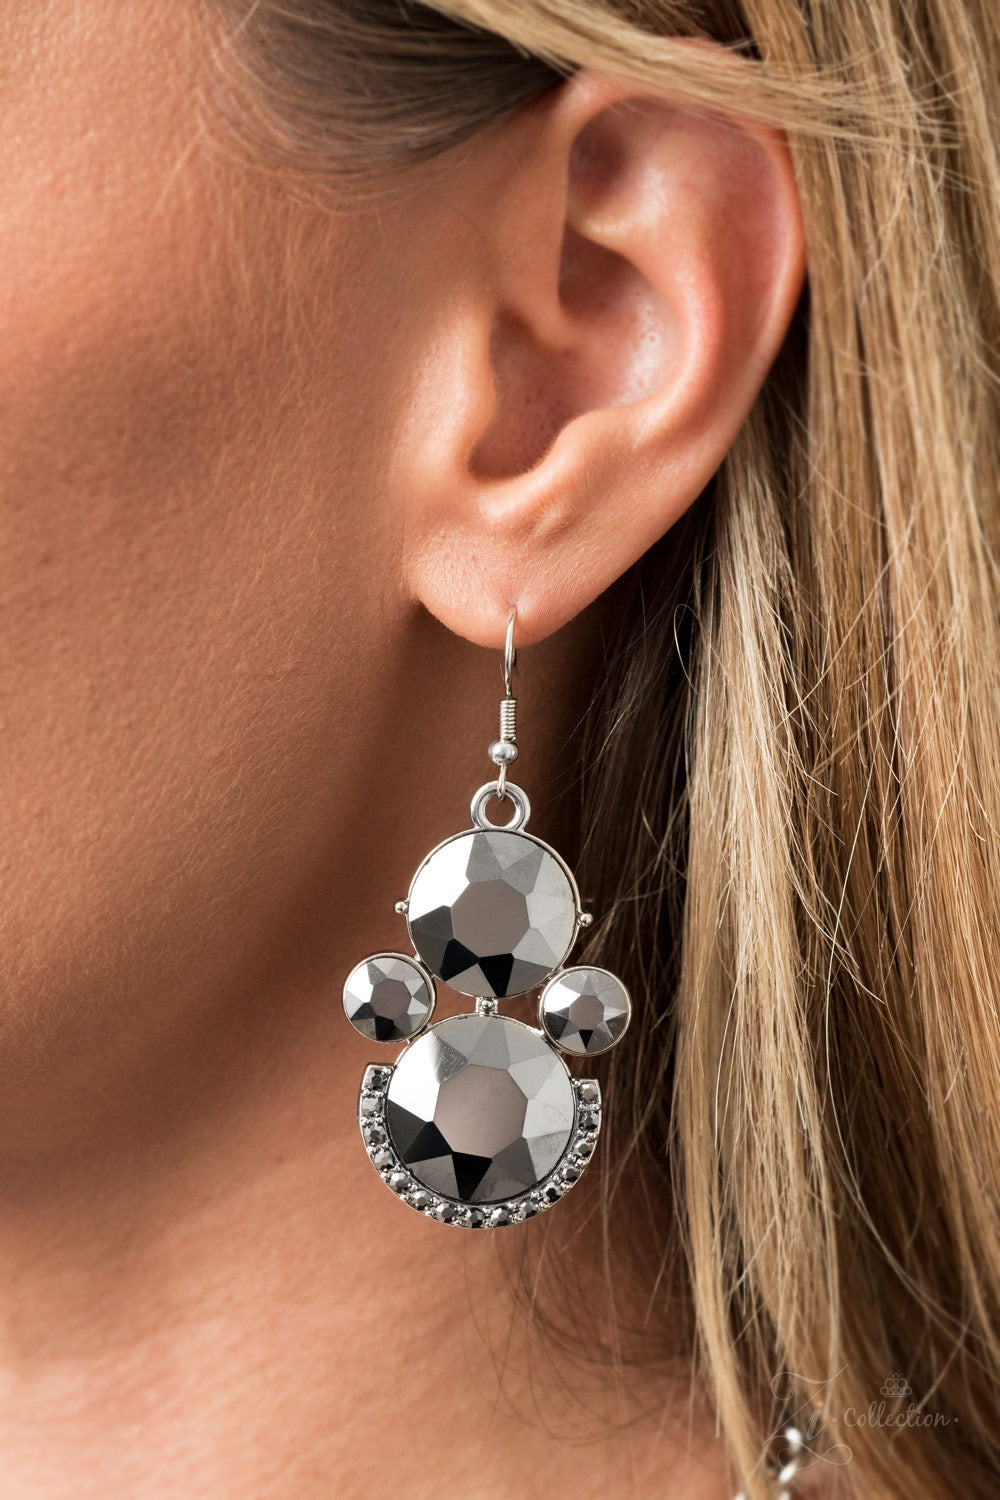 New matching earrings, Featuring swirls of dainty hematite encrusted frames, the stunningly stacked frames fan out into a flammable sparkle below the collar.